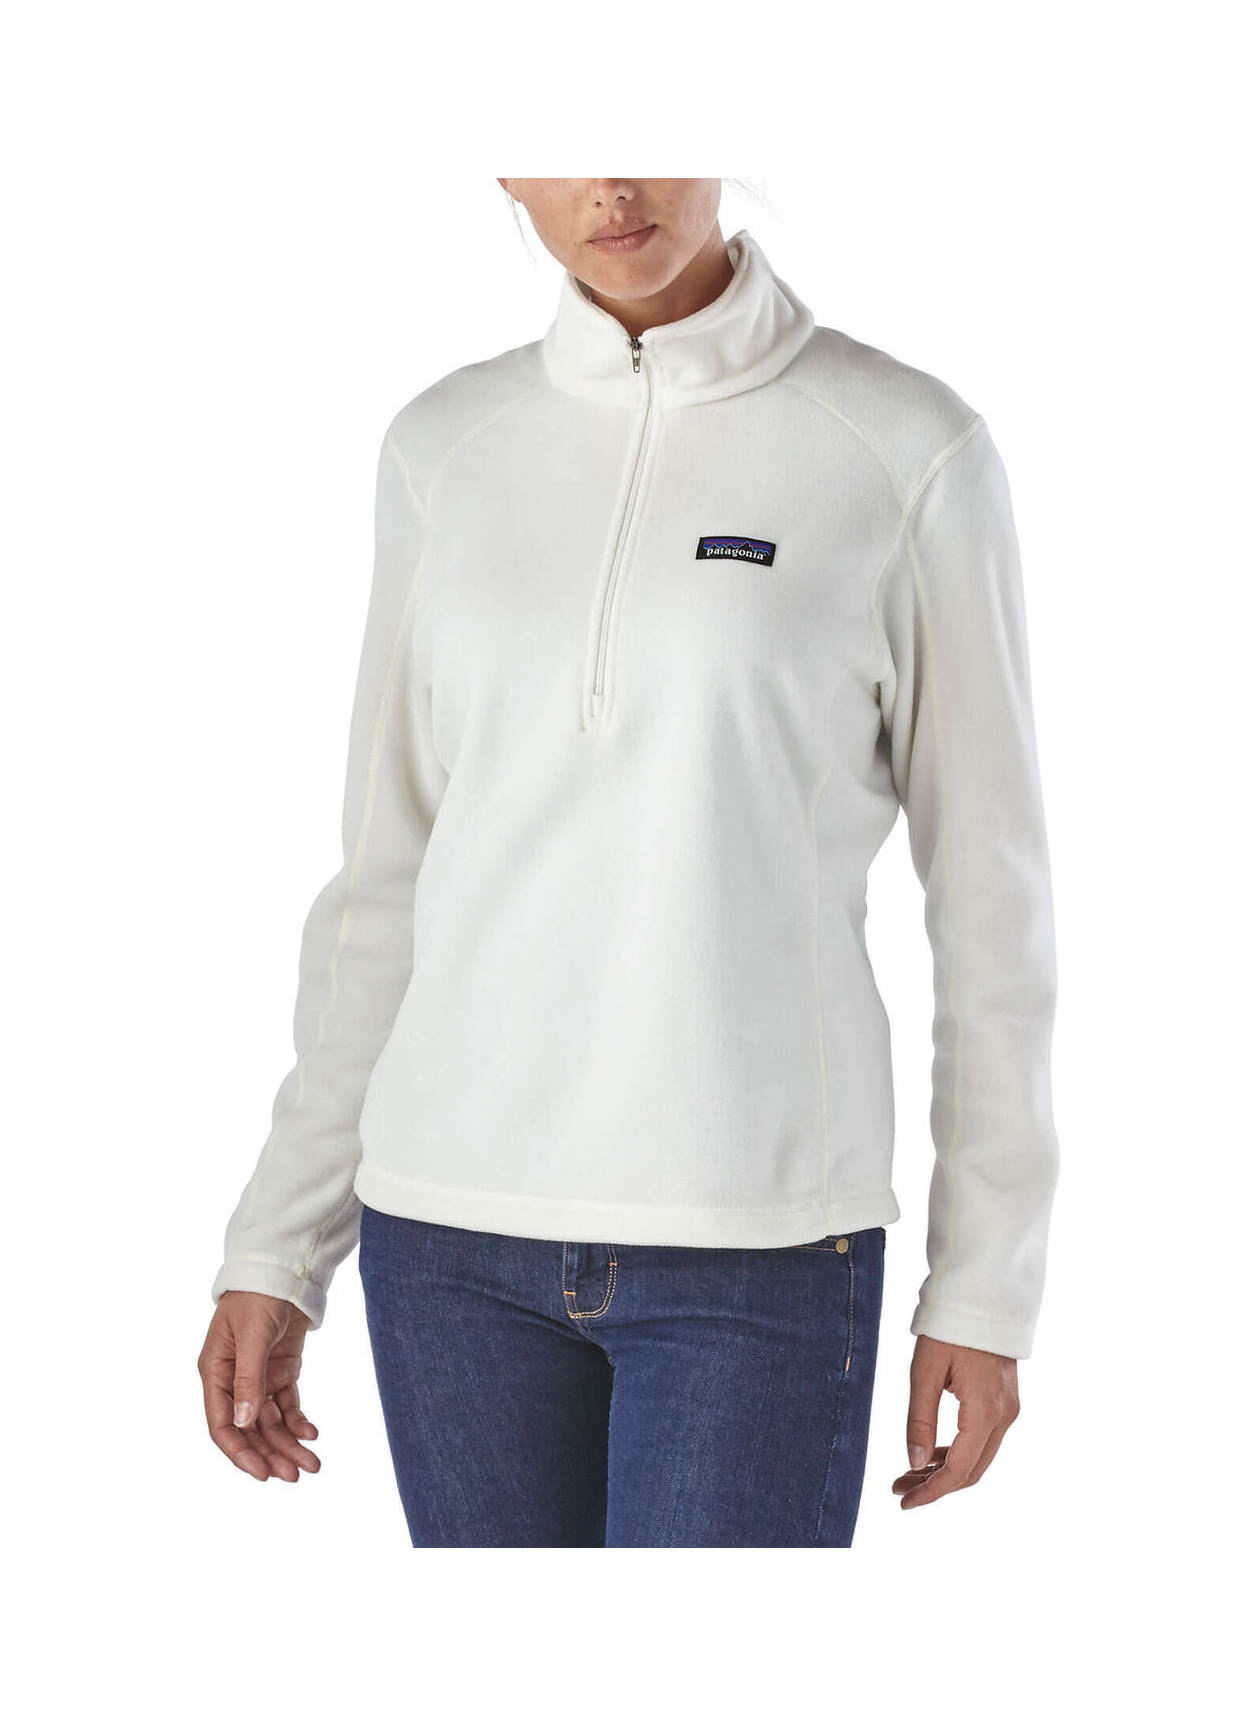 Patagonia Women Better Sweater 1/4 Zip Large Oyster White Fleece Pullover  25618